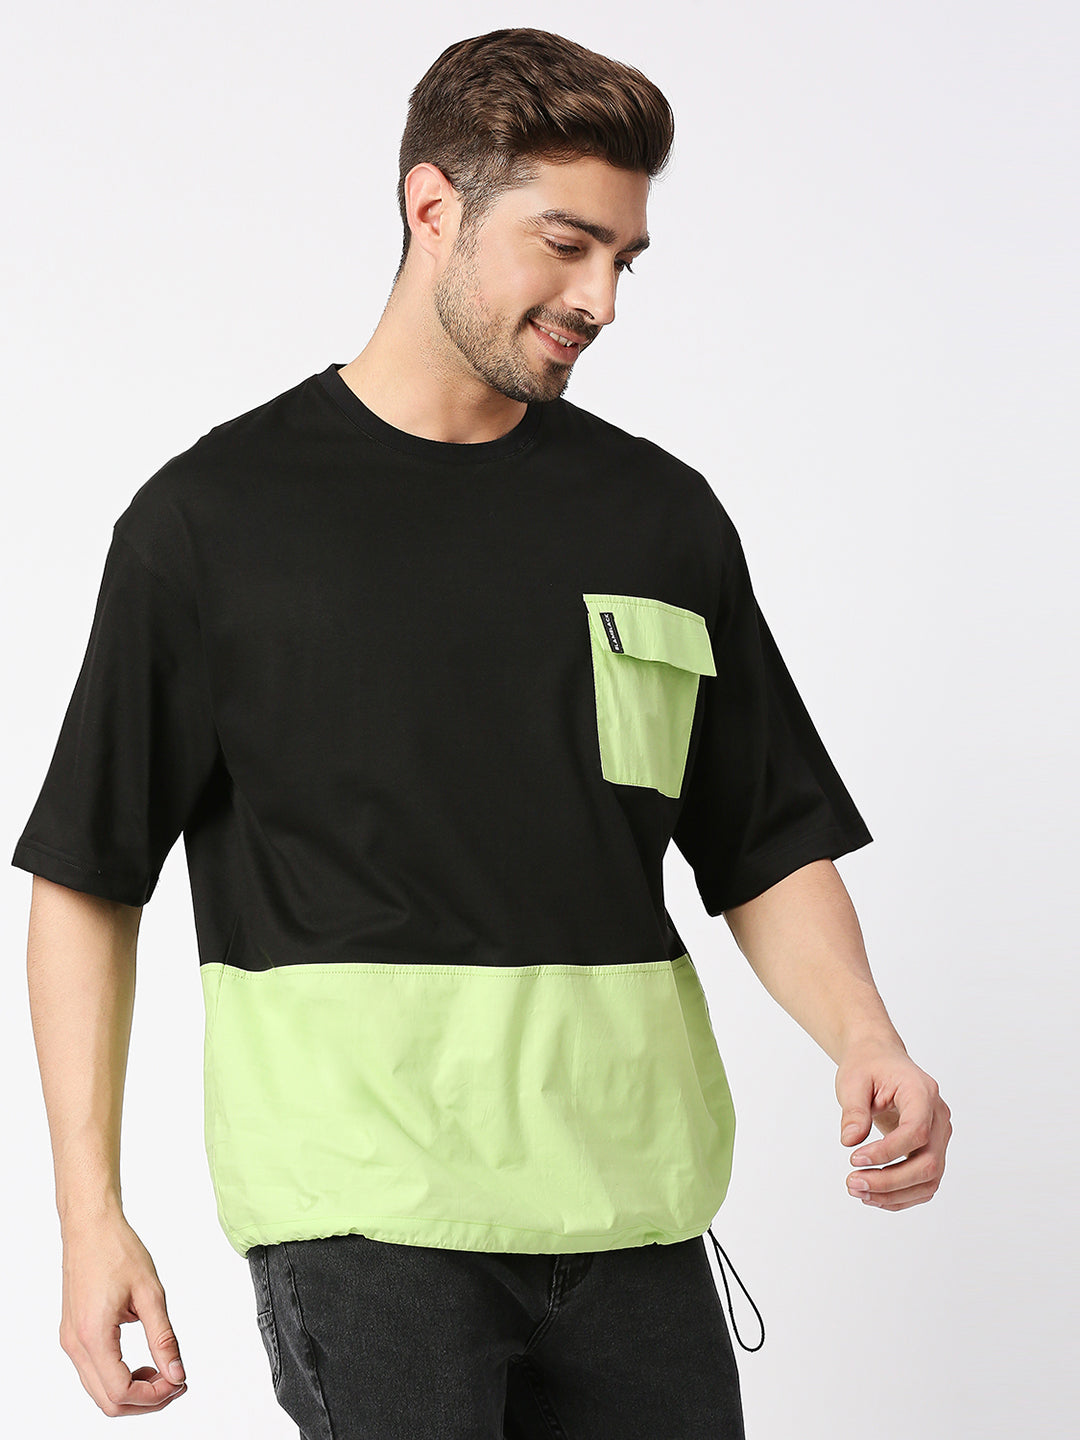 Buy BLAMBLACK Men's Half Sleeves Over-Sized Fit Round neck Colour-Blocked T-Shirt